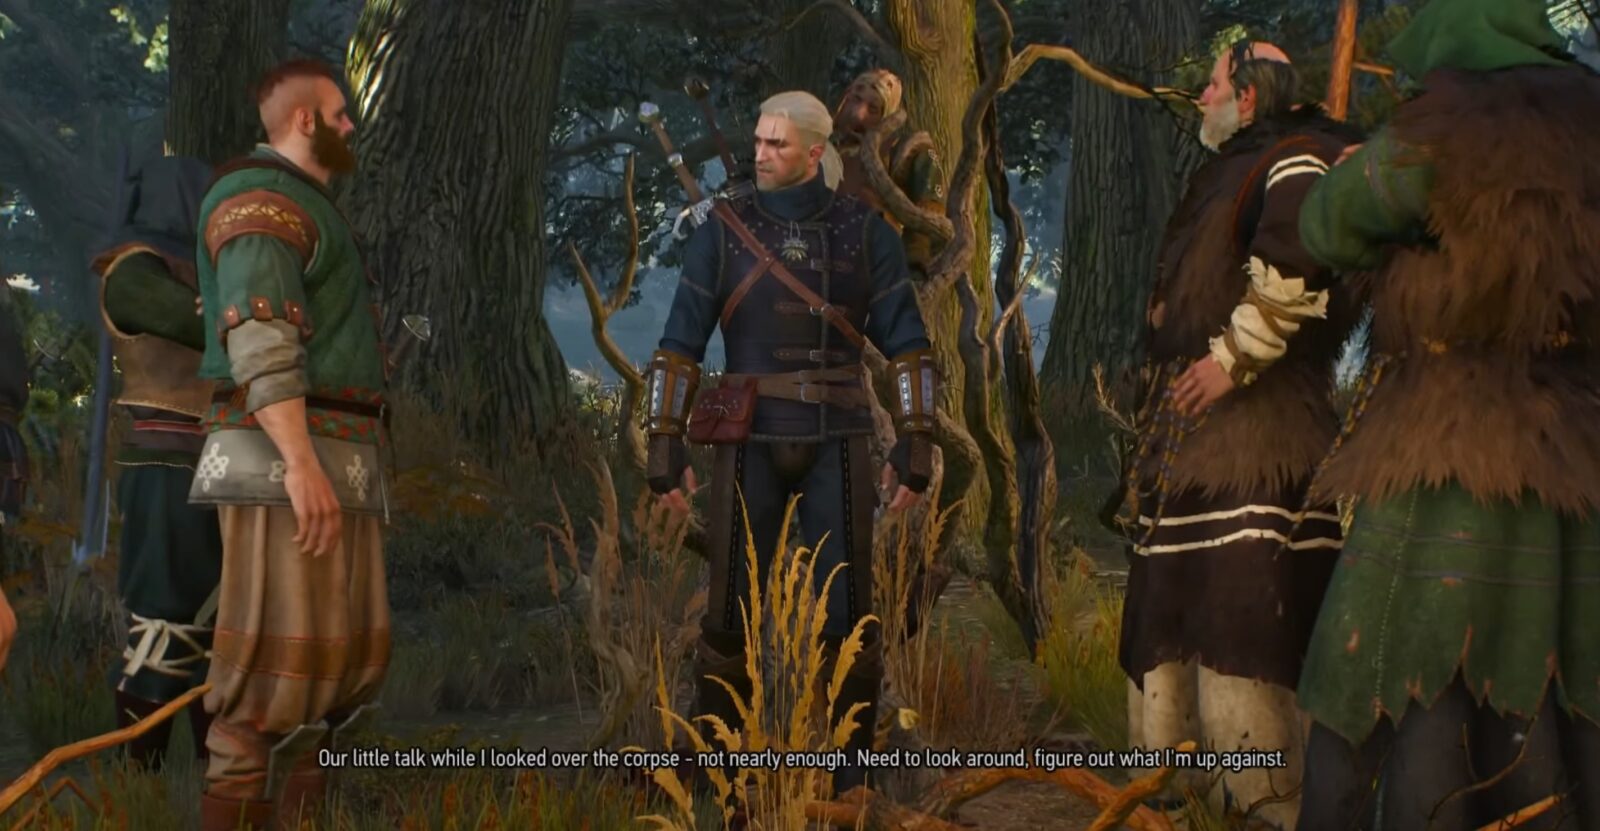 The Witcher 3 In the Heart of the Woods